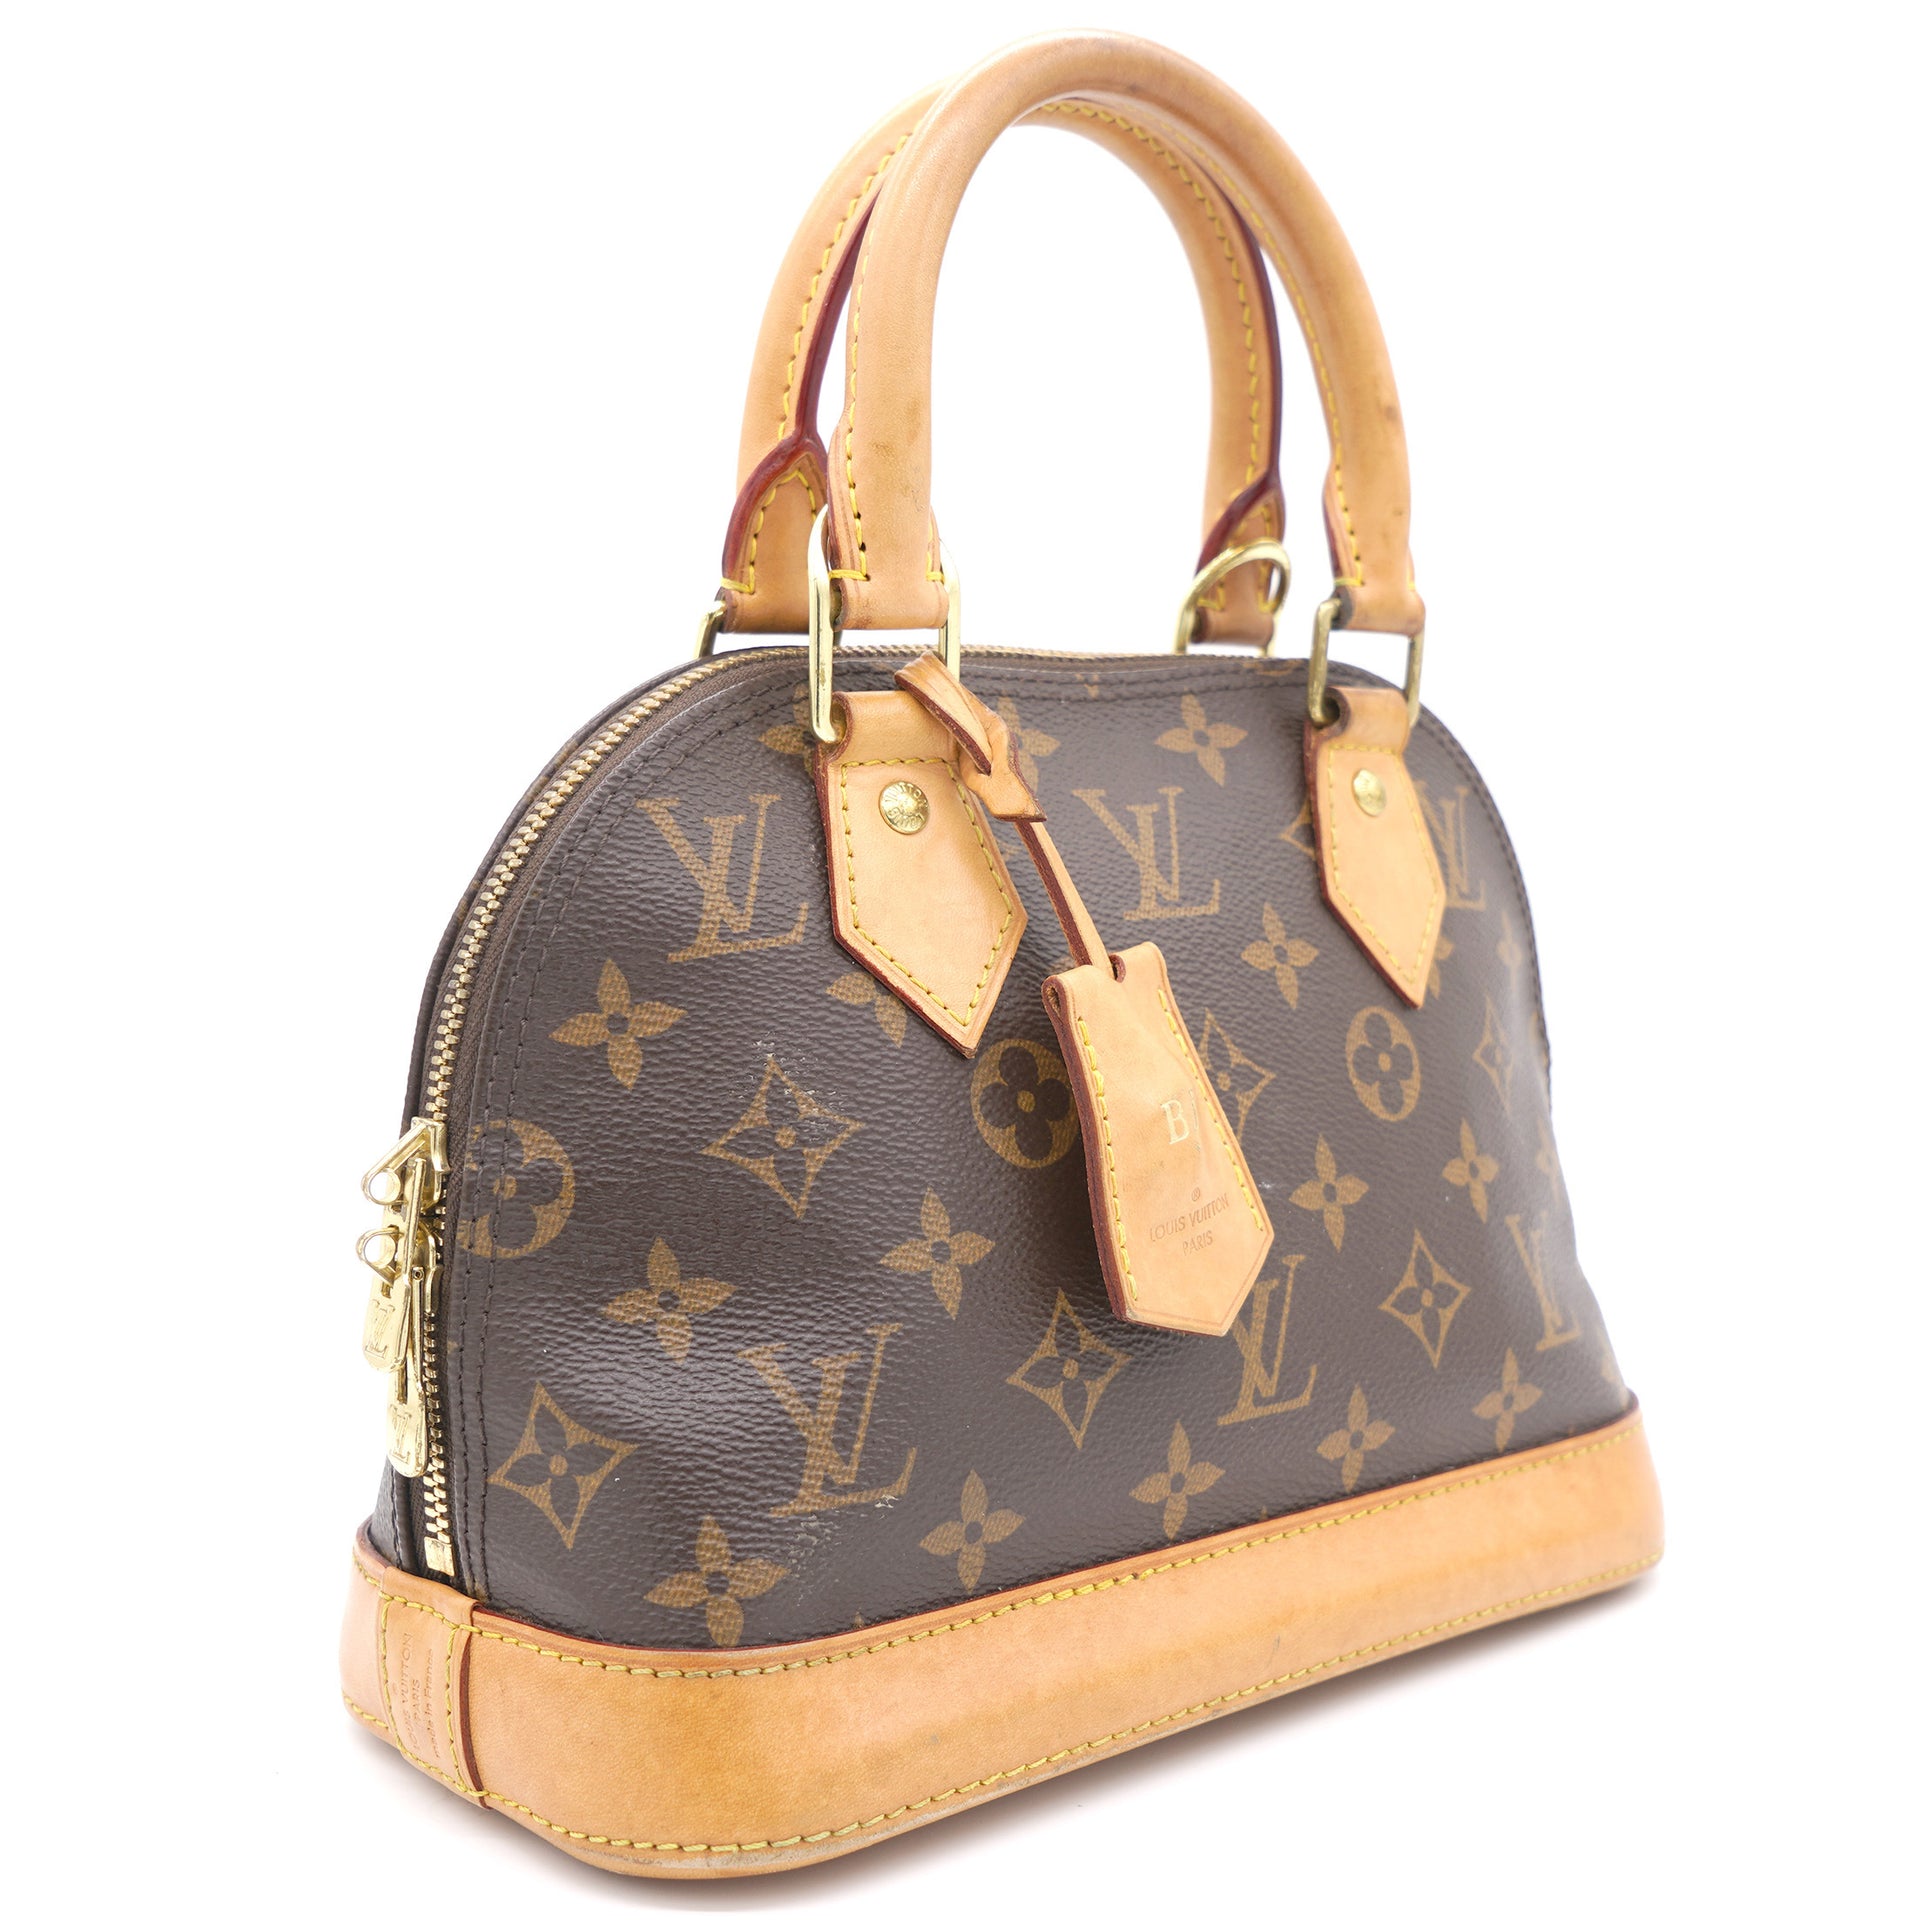 How to authenticate a Louis Vuitton Alma: 5 steps